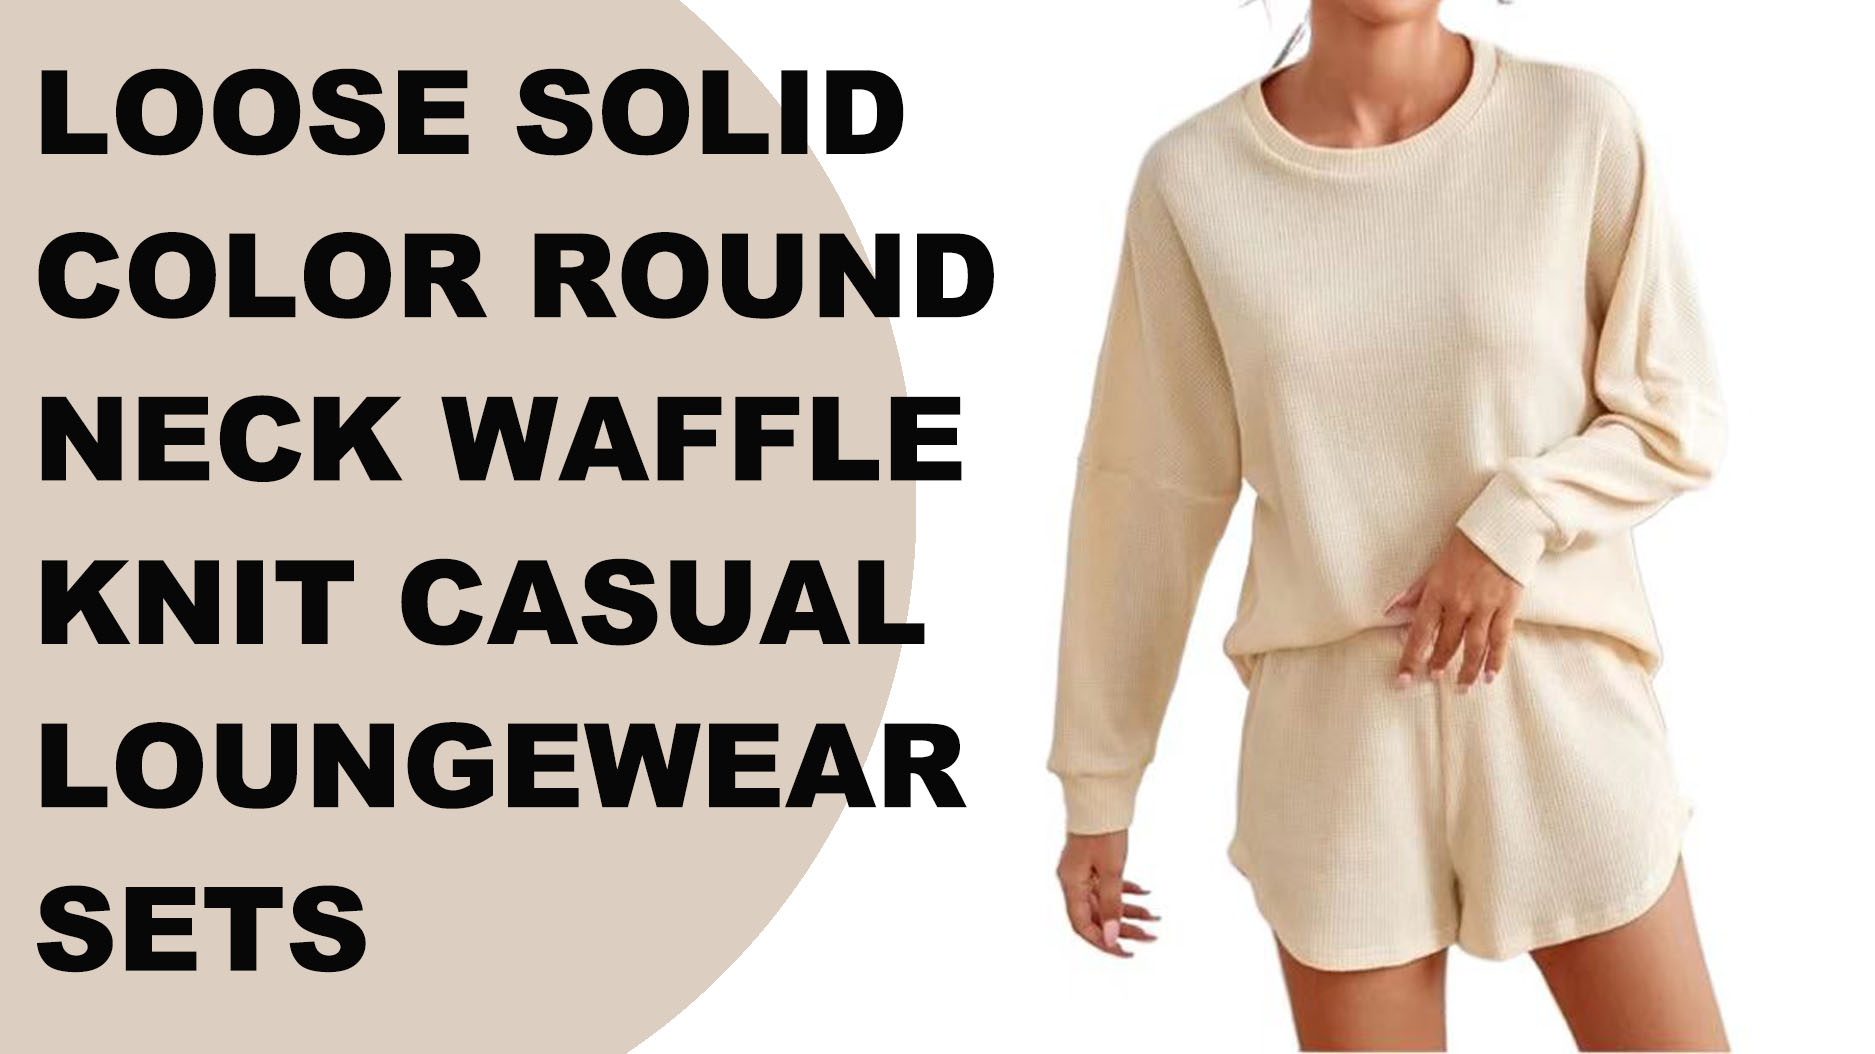 Loose solid color round neck waffle knit off-the-shoulder casual loungewear sets